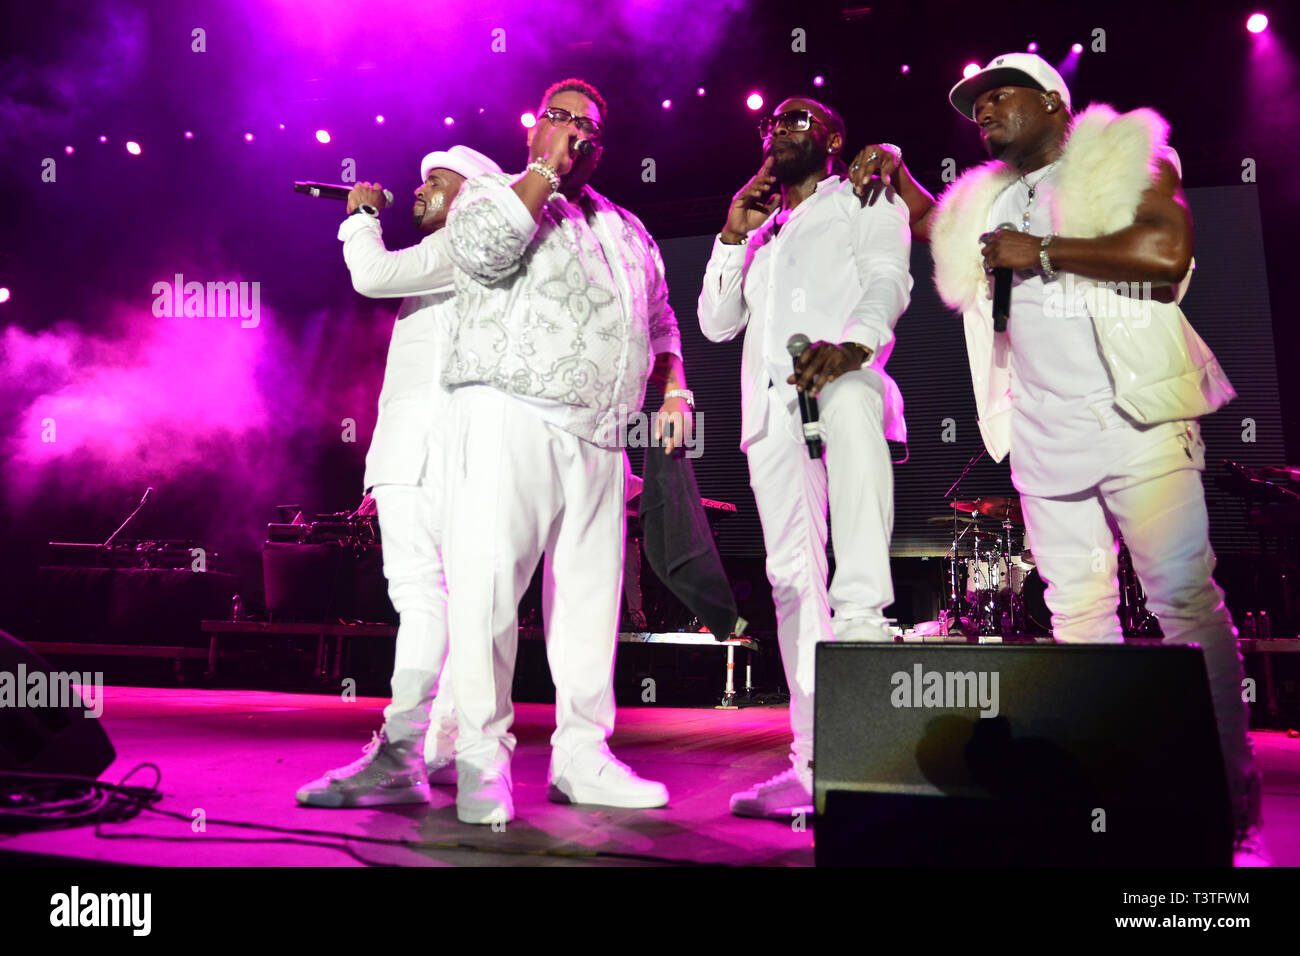 performs during the 14th Annual Jazz in the Gardens Music Festival at Hard Rock Stadium on March 09, 2019 in Miami gardens, Florida.  Featuring: Teddy Riley, Blackstreet Where: Miami Gardens, Florida, United States When: 09 Mar 2019 Credit: Johnny Louis/WENN.com Stock Photo